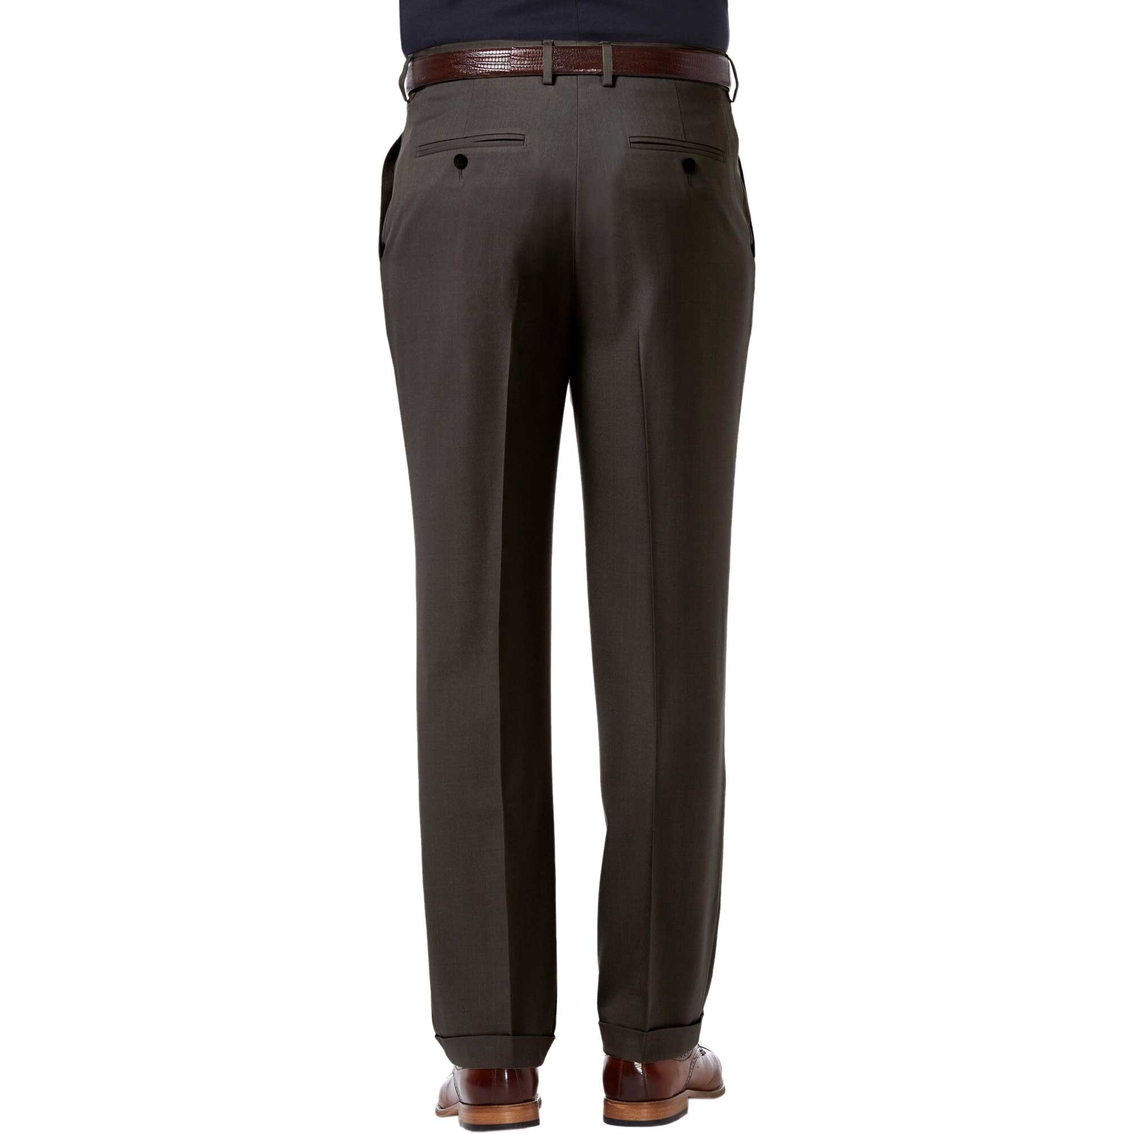 Haggar Premium Comfort 4 Way Stretch Classic Fit Pleat Front Pants - Image 2 of 5